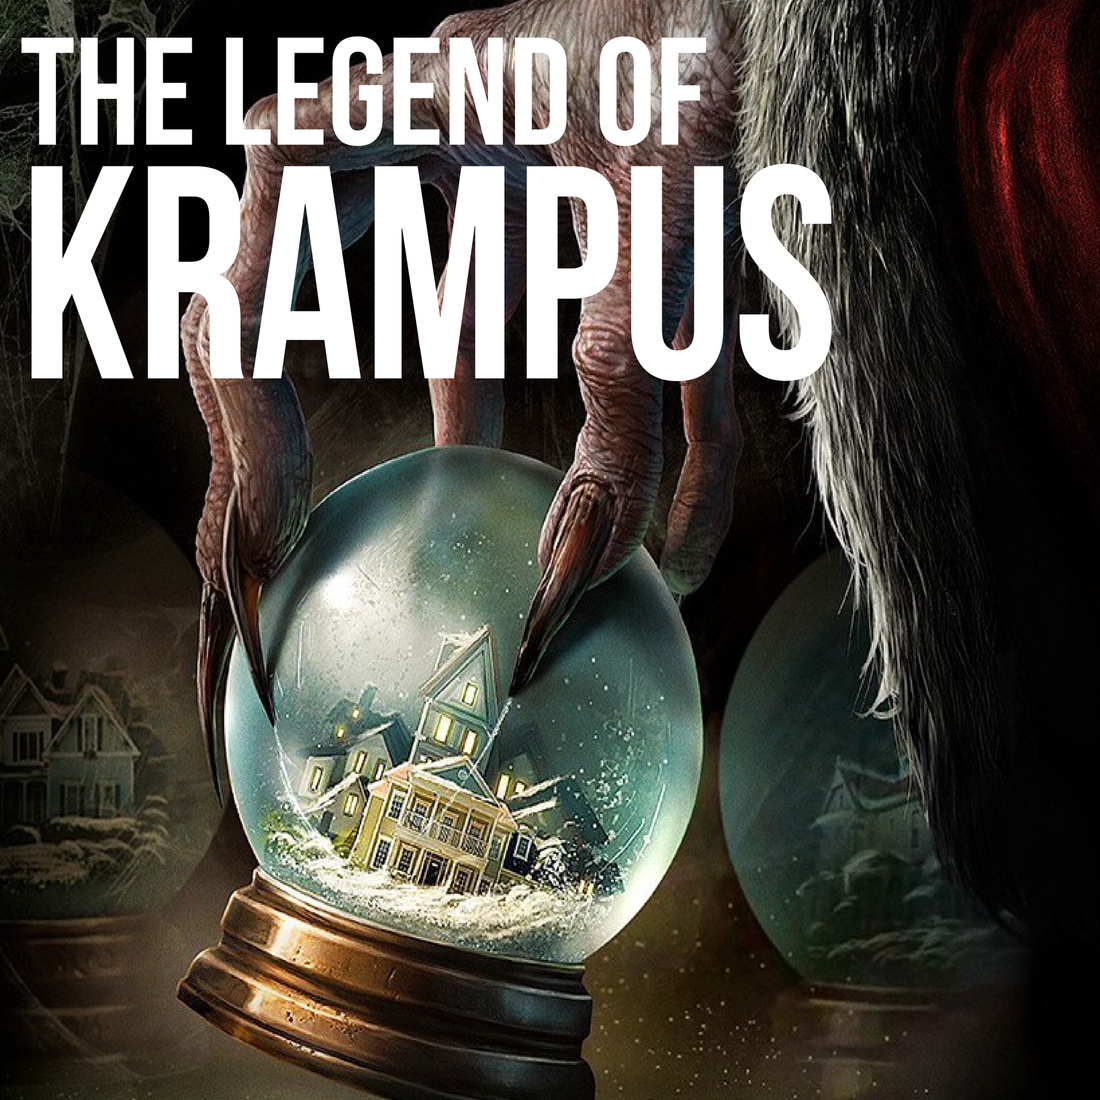 The Legend of Krampus: You'll Wish You Got Coal